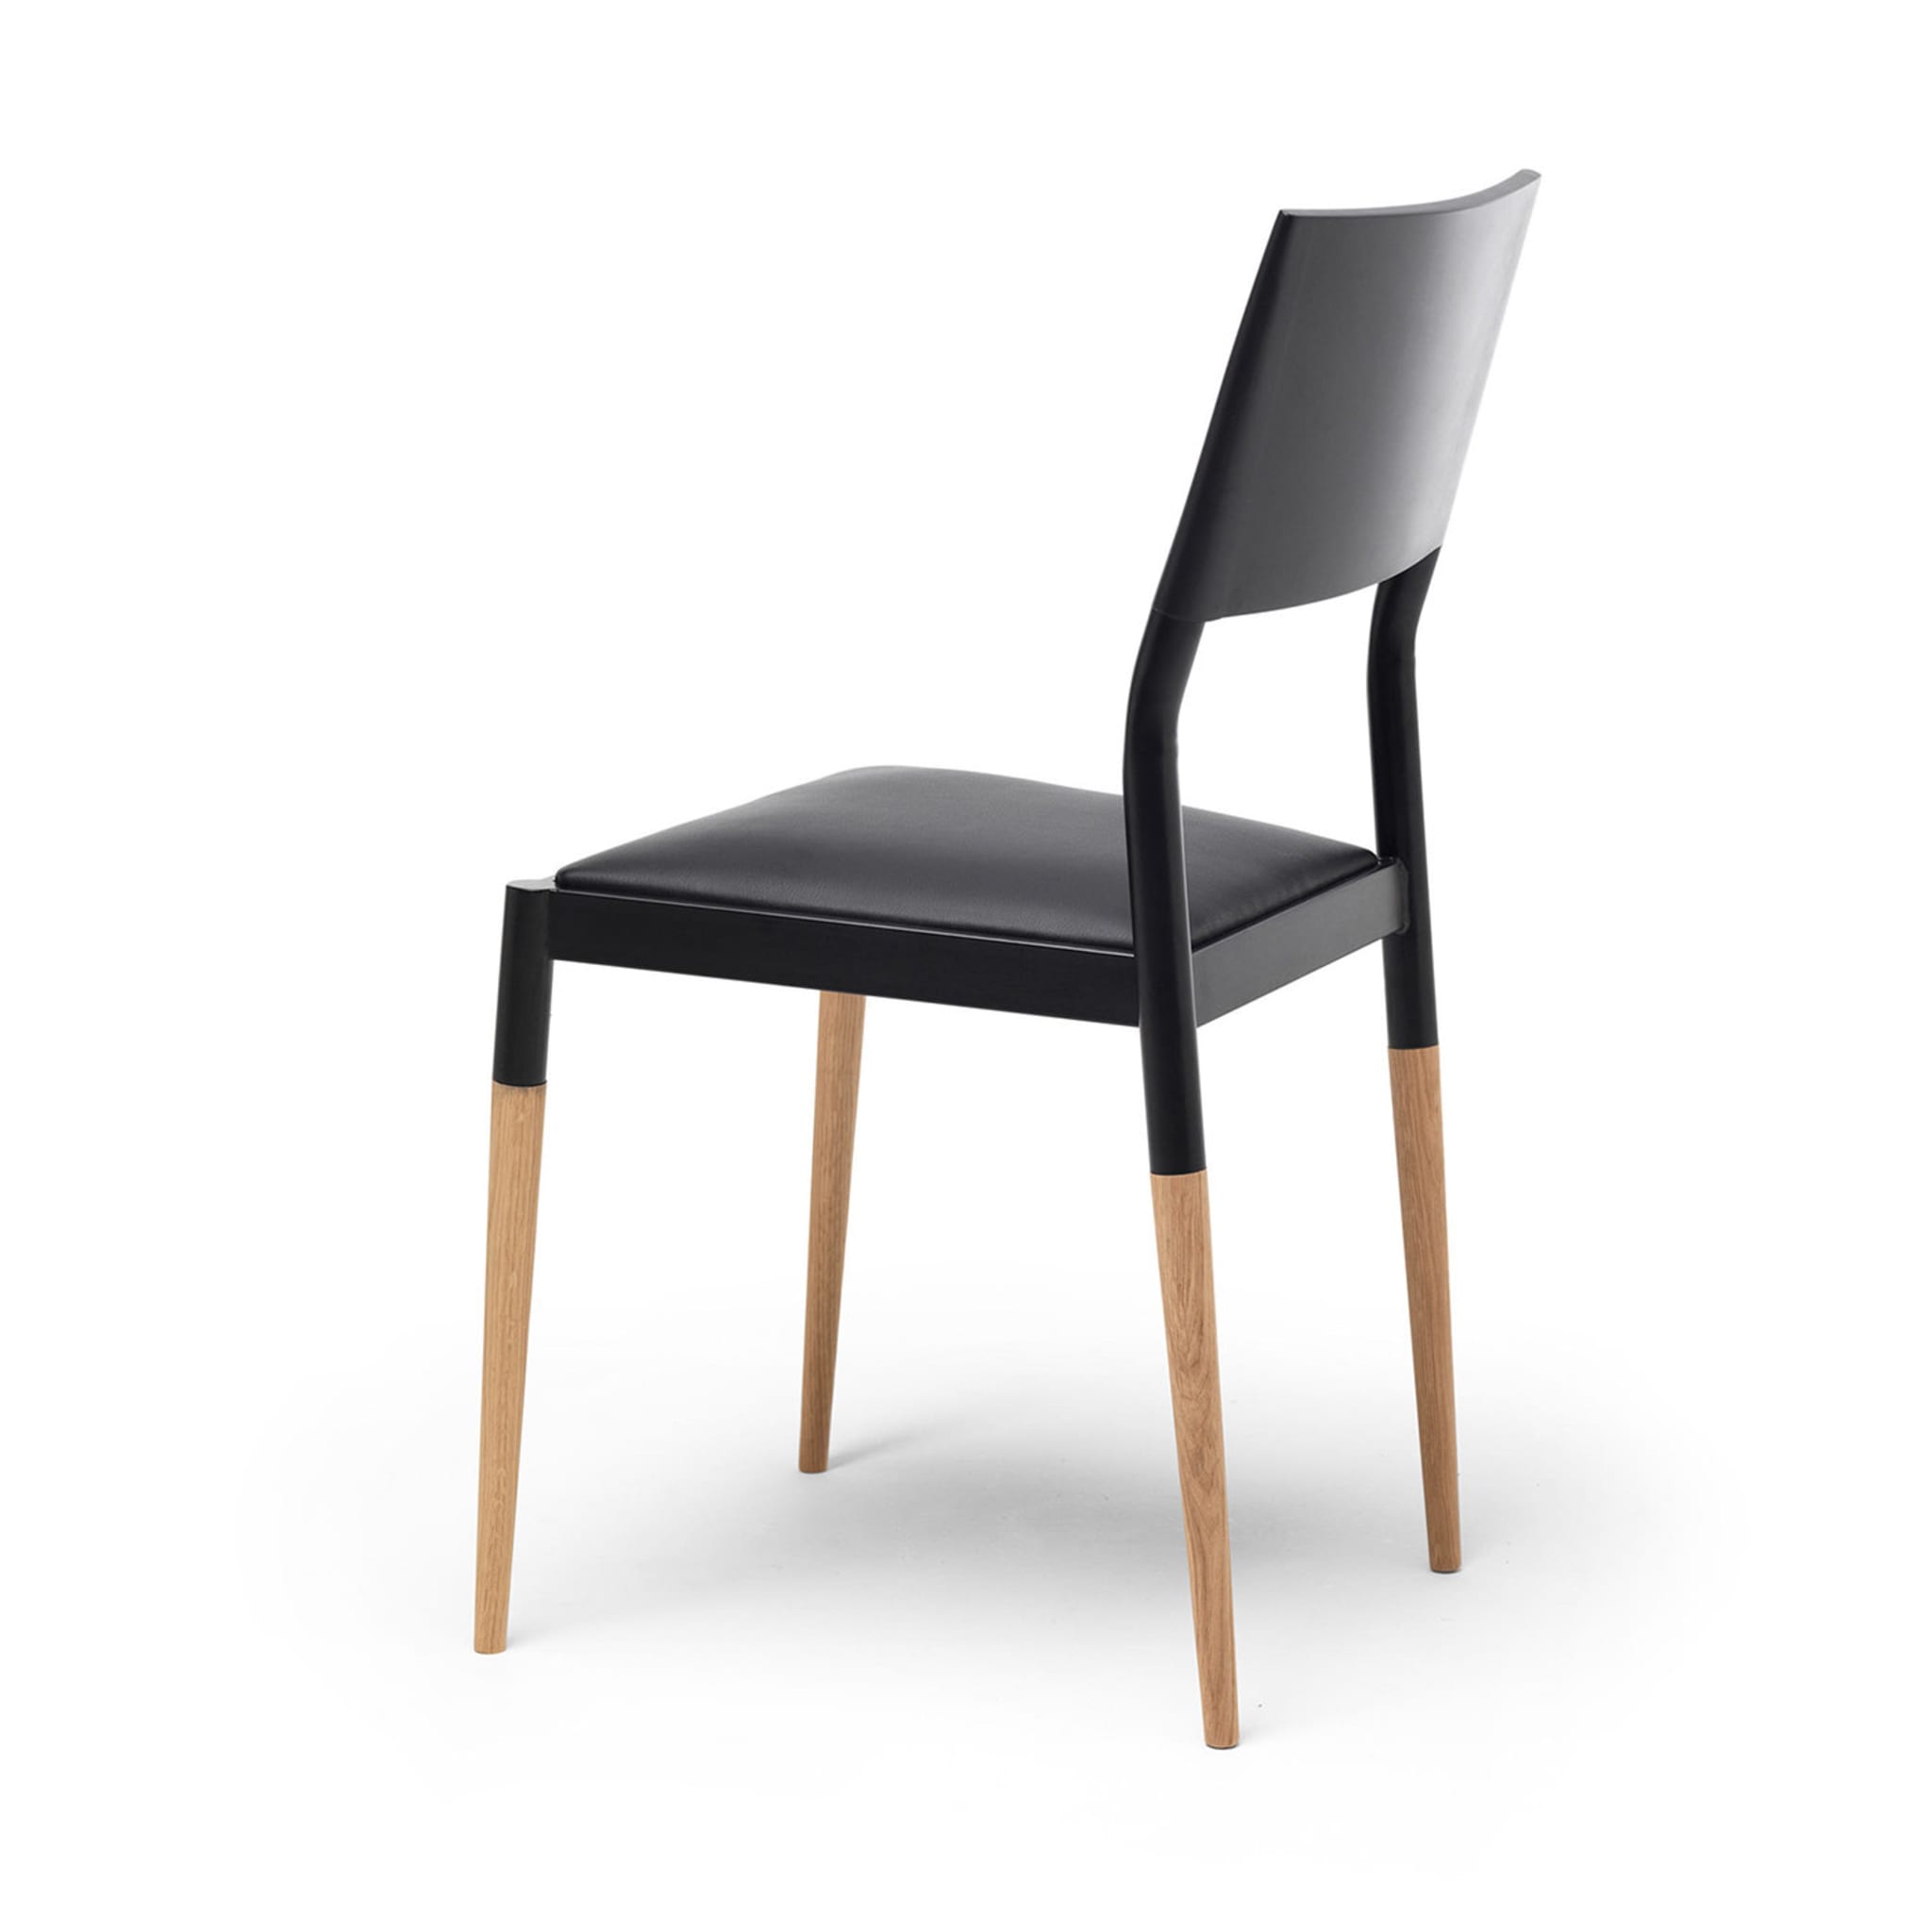 Bic Set of 2 Chairs - Alternative view 2